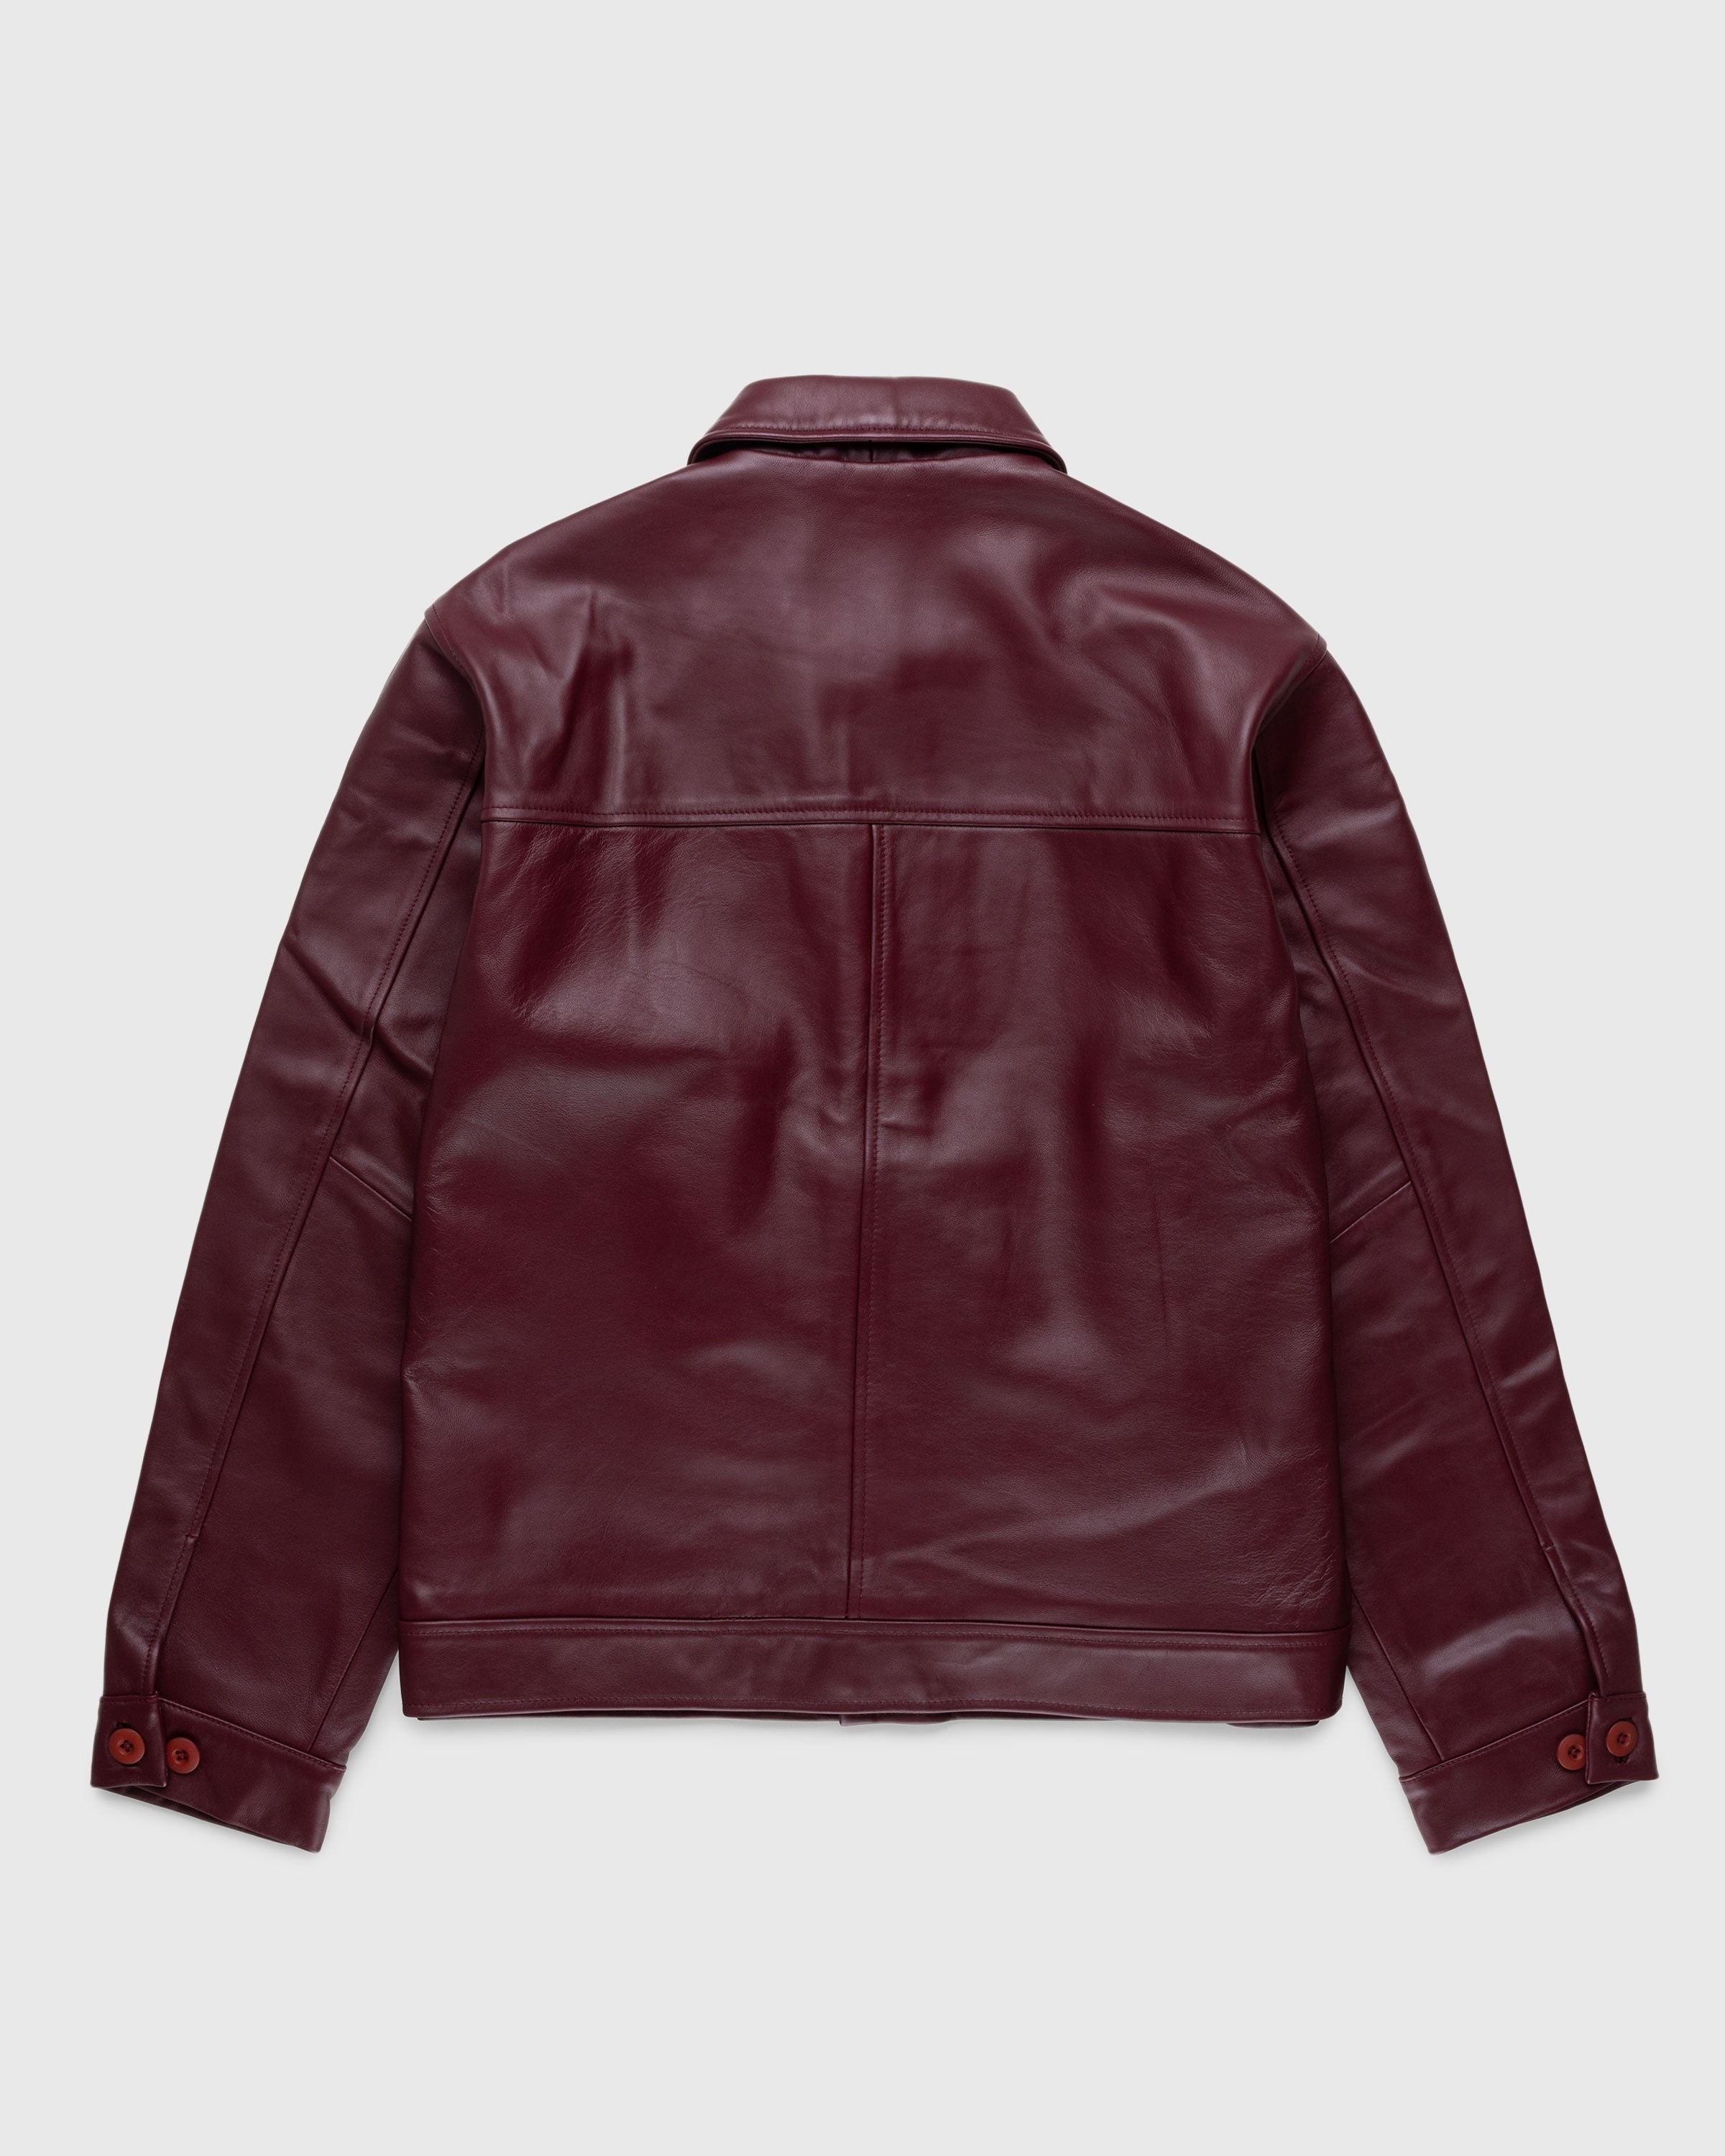 Highsnobiety HS05 – Leather Jacket Burgundy - Outerwear - Red - Image 2